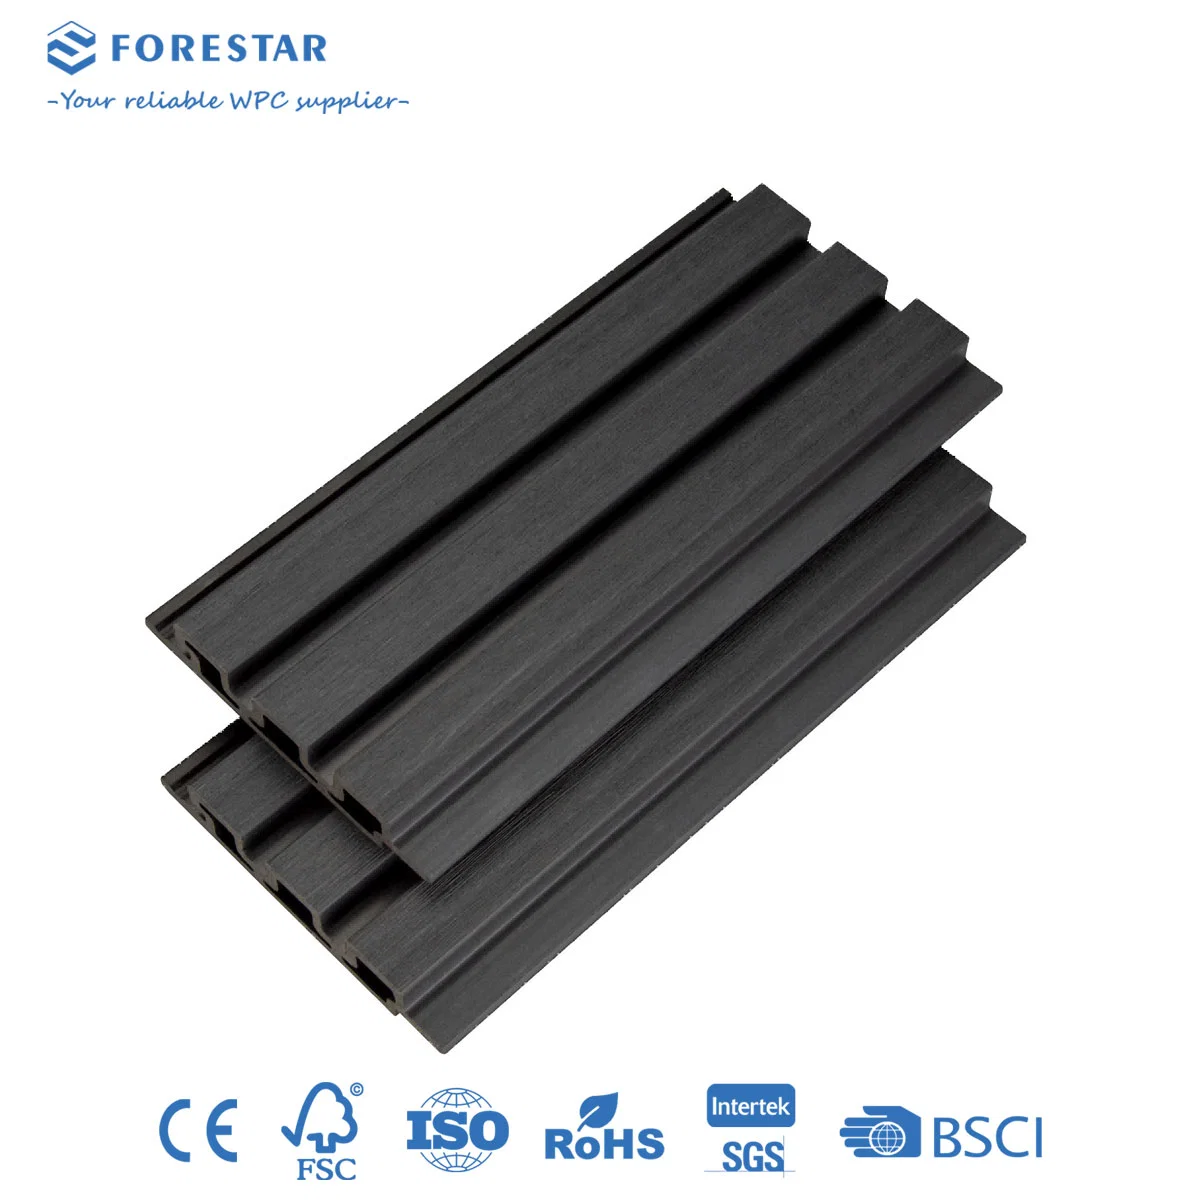 Anti-Termite Co-Extrusion Exterior Wall Covering Outdoor Decorative WPC Wood Plastic Composite Siding Cladding Panels